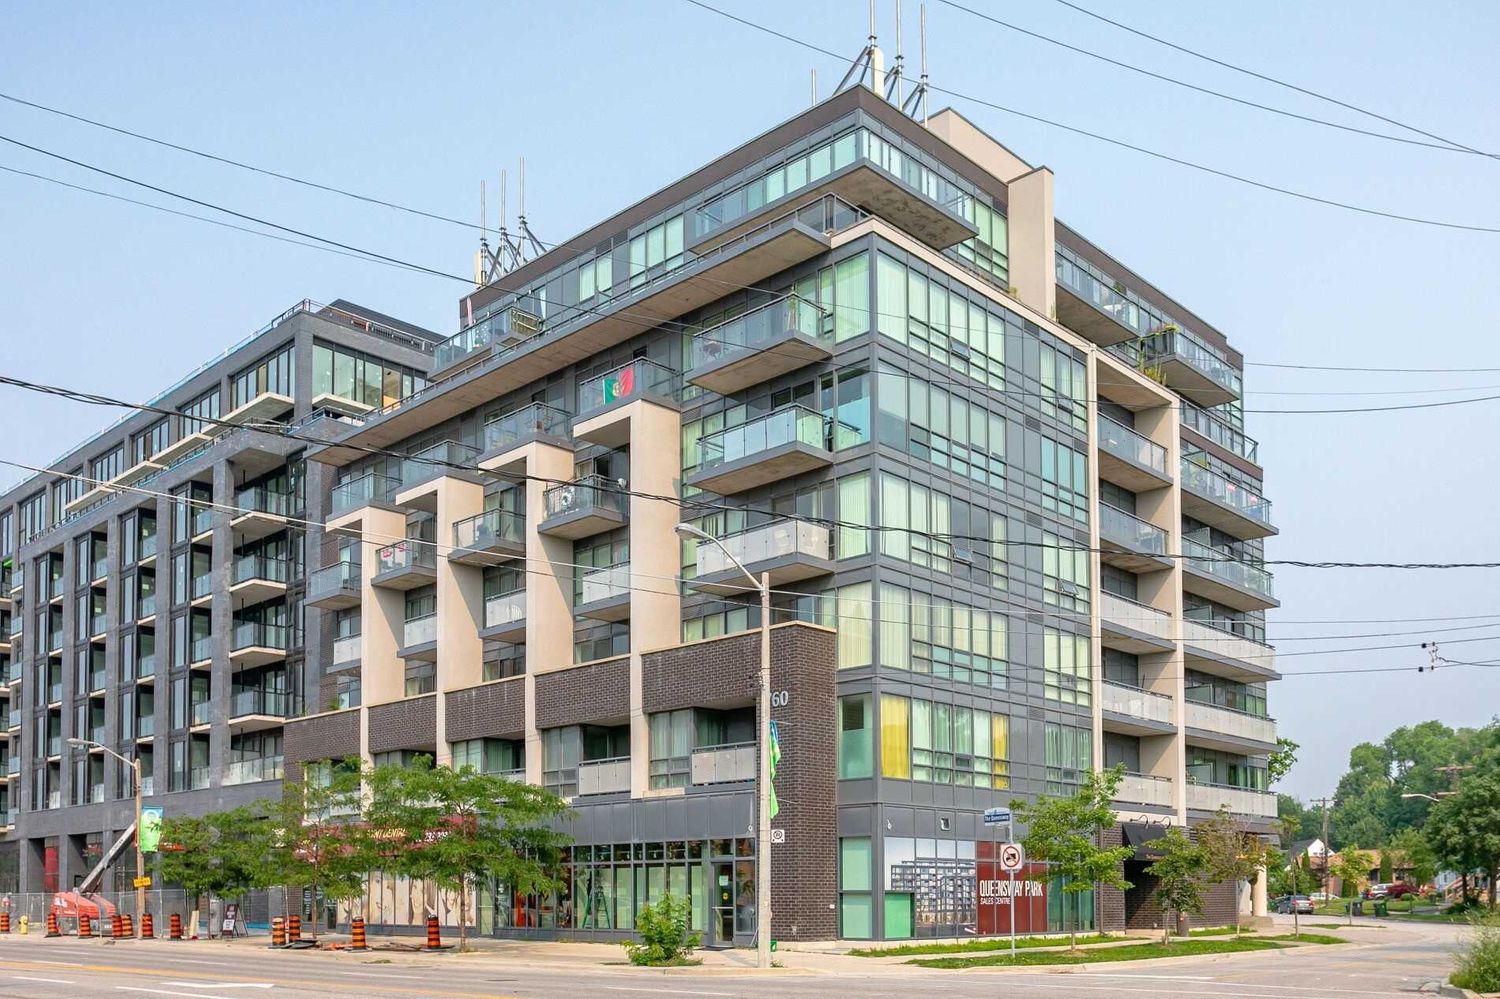 760 The Queensway. Qube Condos is located in  Etobicoke, Toronto - image #2 of 2